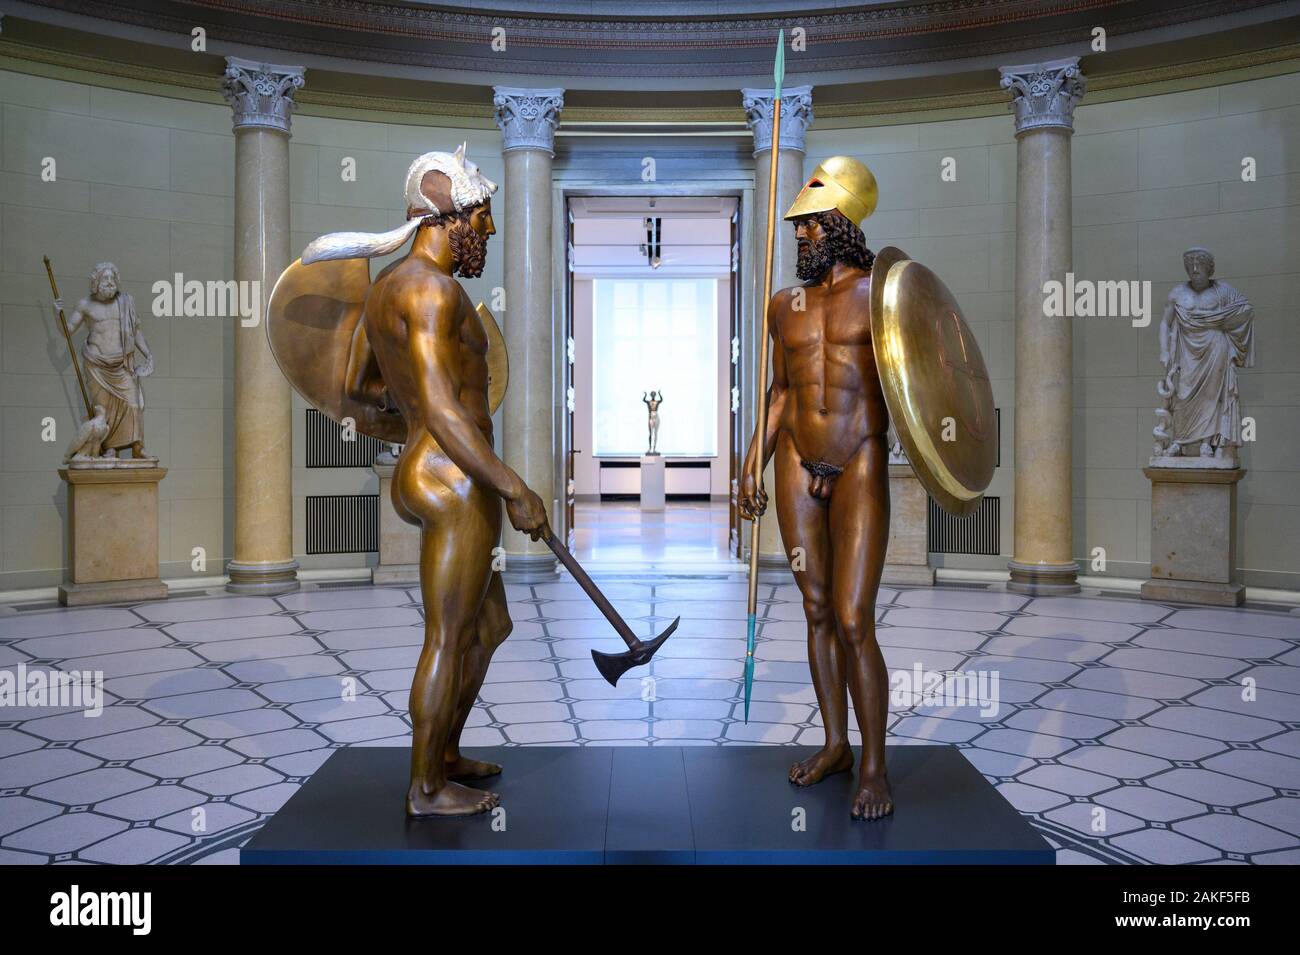 Berlin. Germany. Reconstruction of the ancient Greek bronze statues known as the Riace Warriors (aka Riace Bronzes), showing how the statues may have Stock Photo